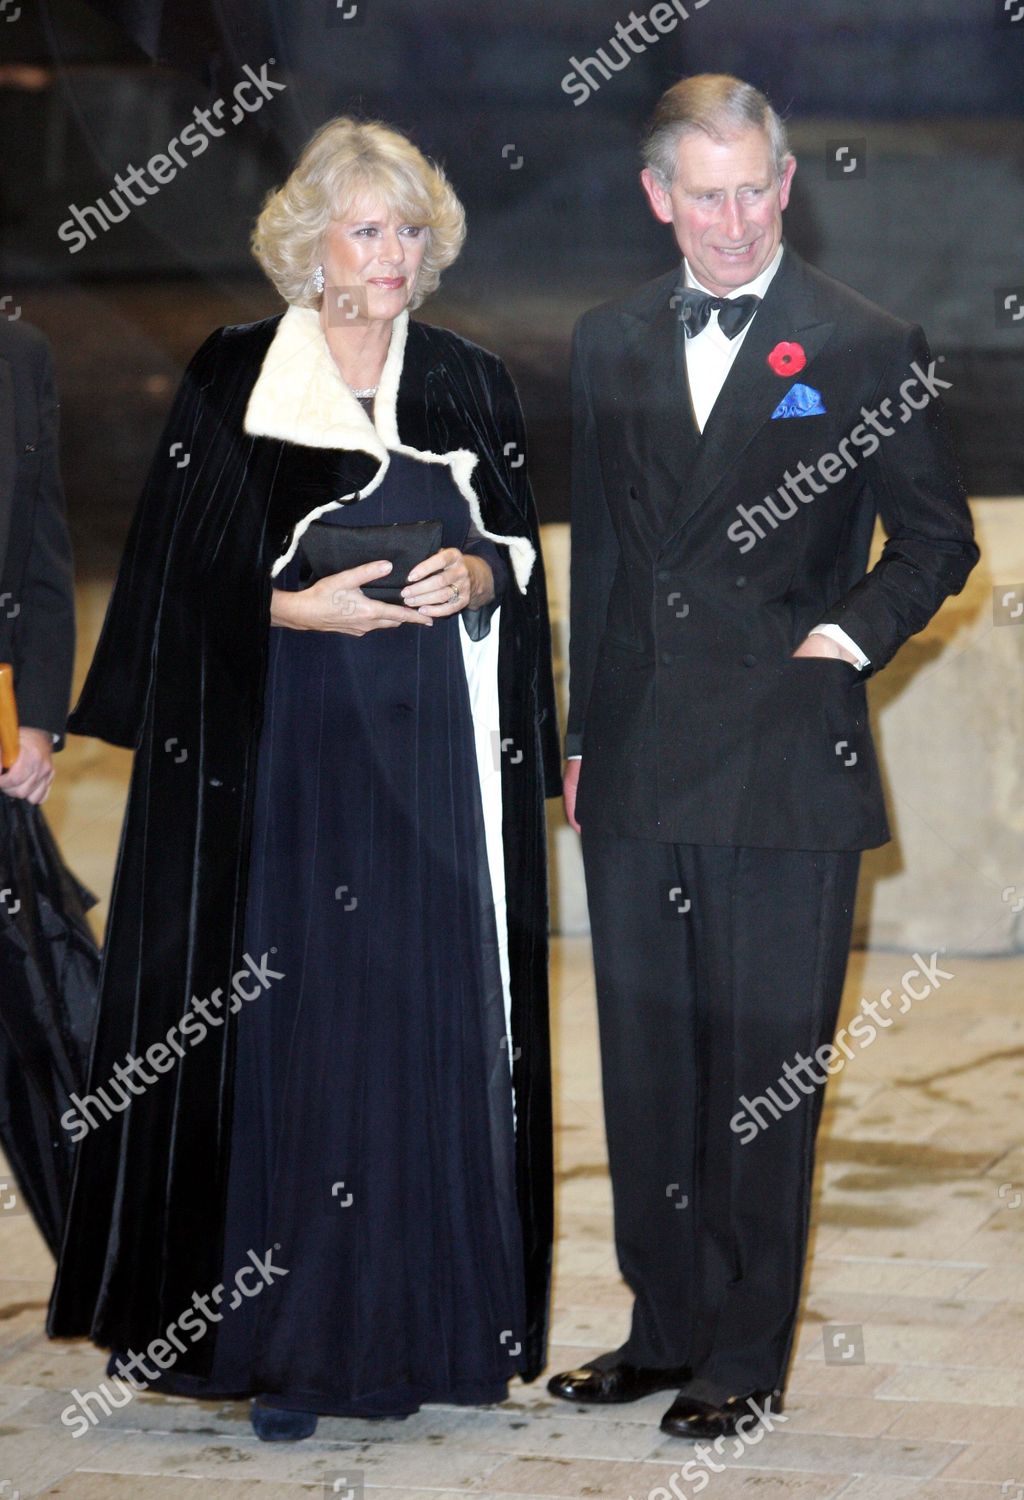 hrh-prince-charles-camilla-duchess-of-cornwall-arrive-at-the-de-young-museum-for-a-reception-and-dinner-with-business-and-civic-leaders-in-san-francisco-usa-shutterstock-editorial-970602a.jpg